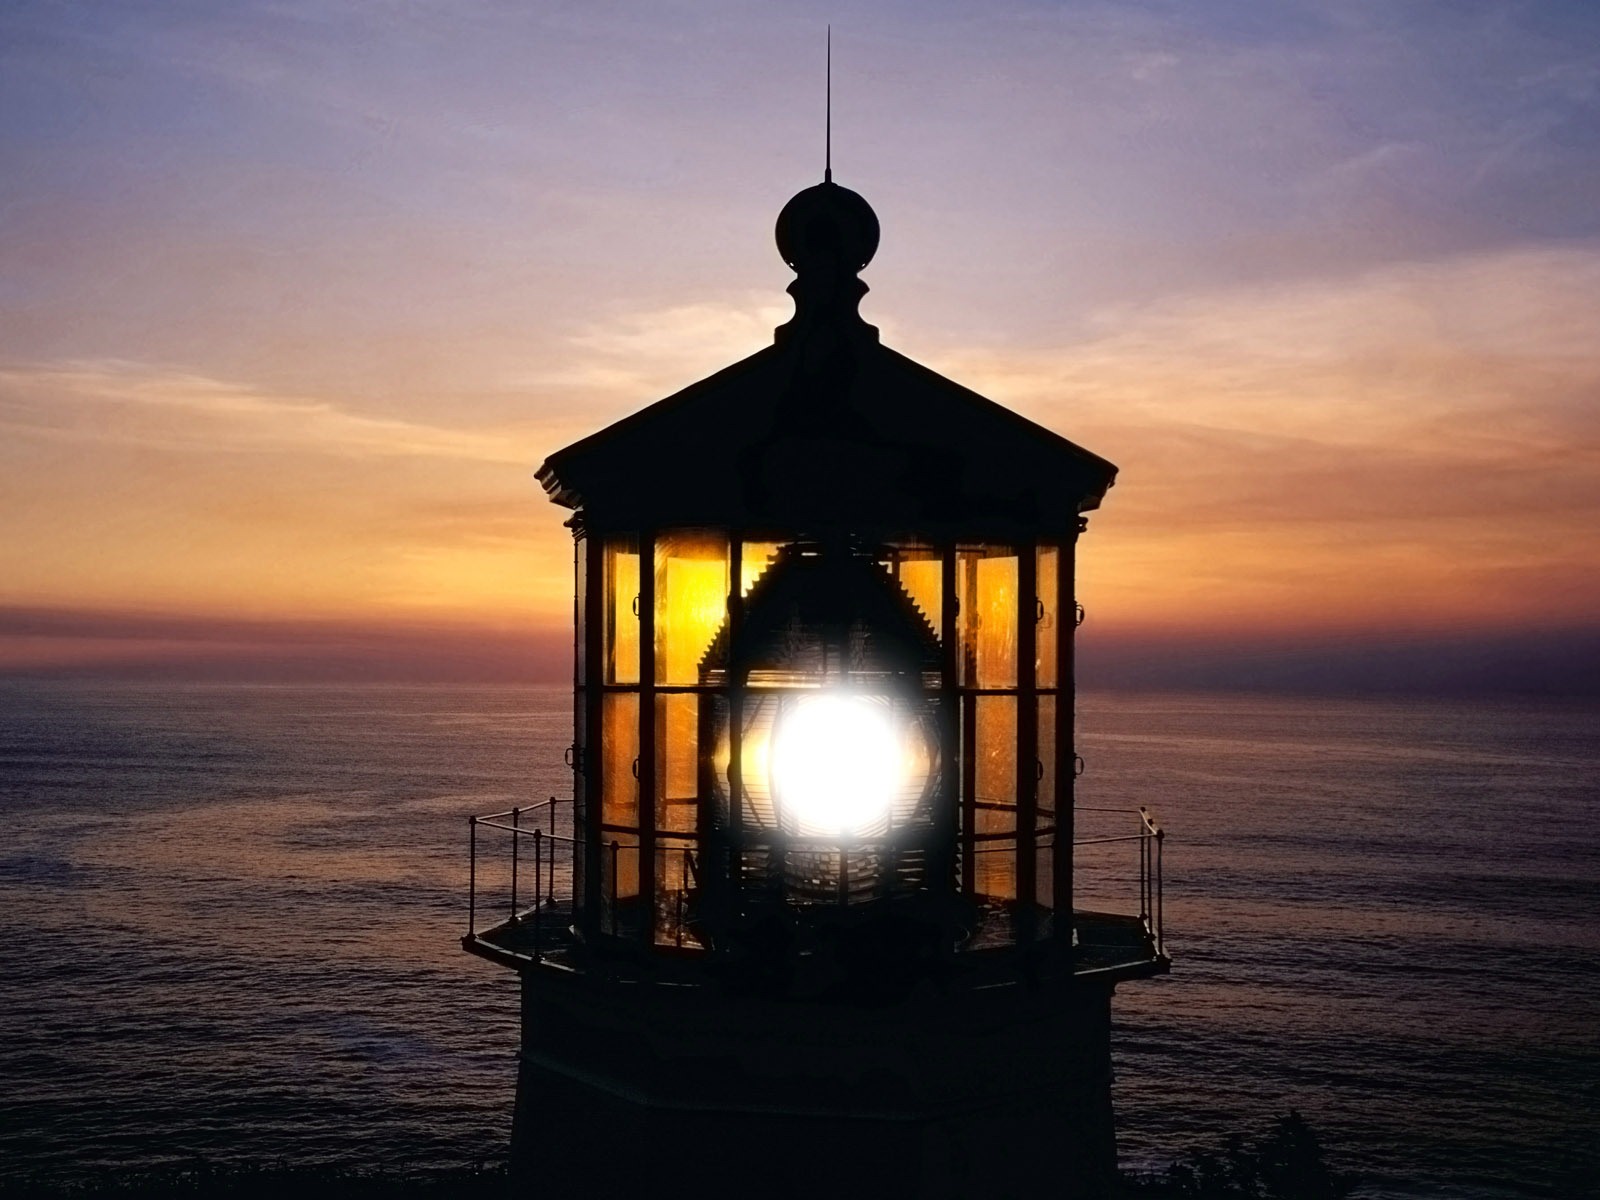 Windows 7 Wallpapers: Lighthouses #8 - 1600x1200